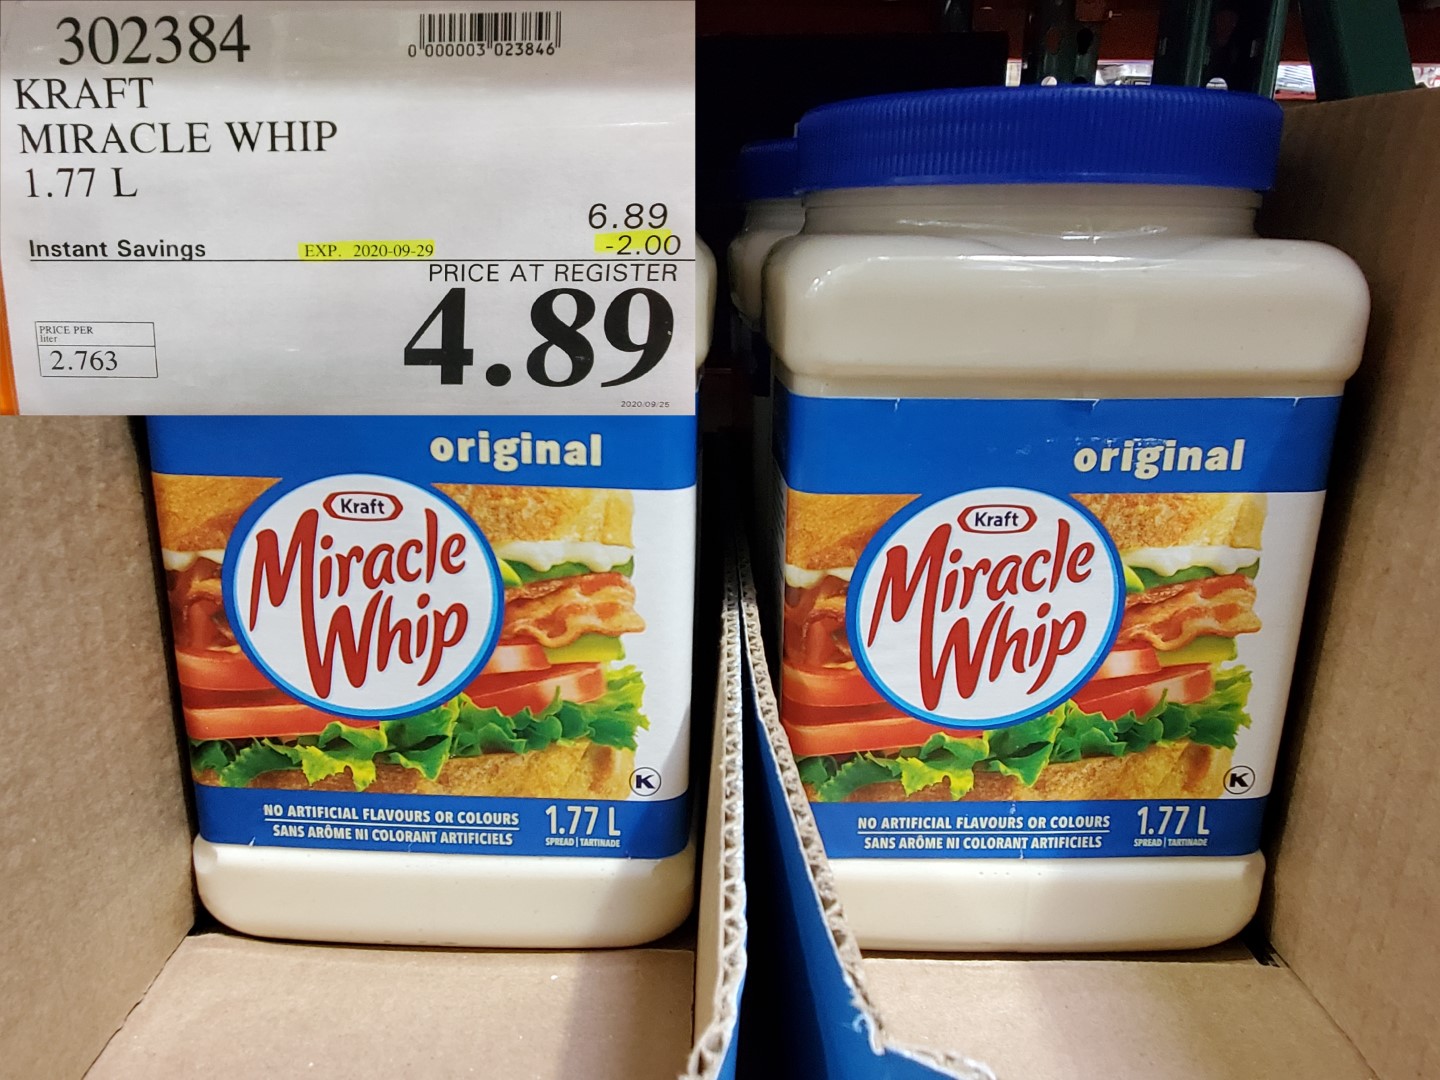 302384 KRAFT MIRACLE WHIP 1 77 L 2 00 INSTANT SAVINGS EXPIRES ON 2020 ...